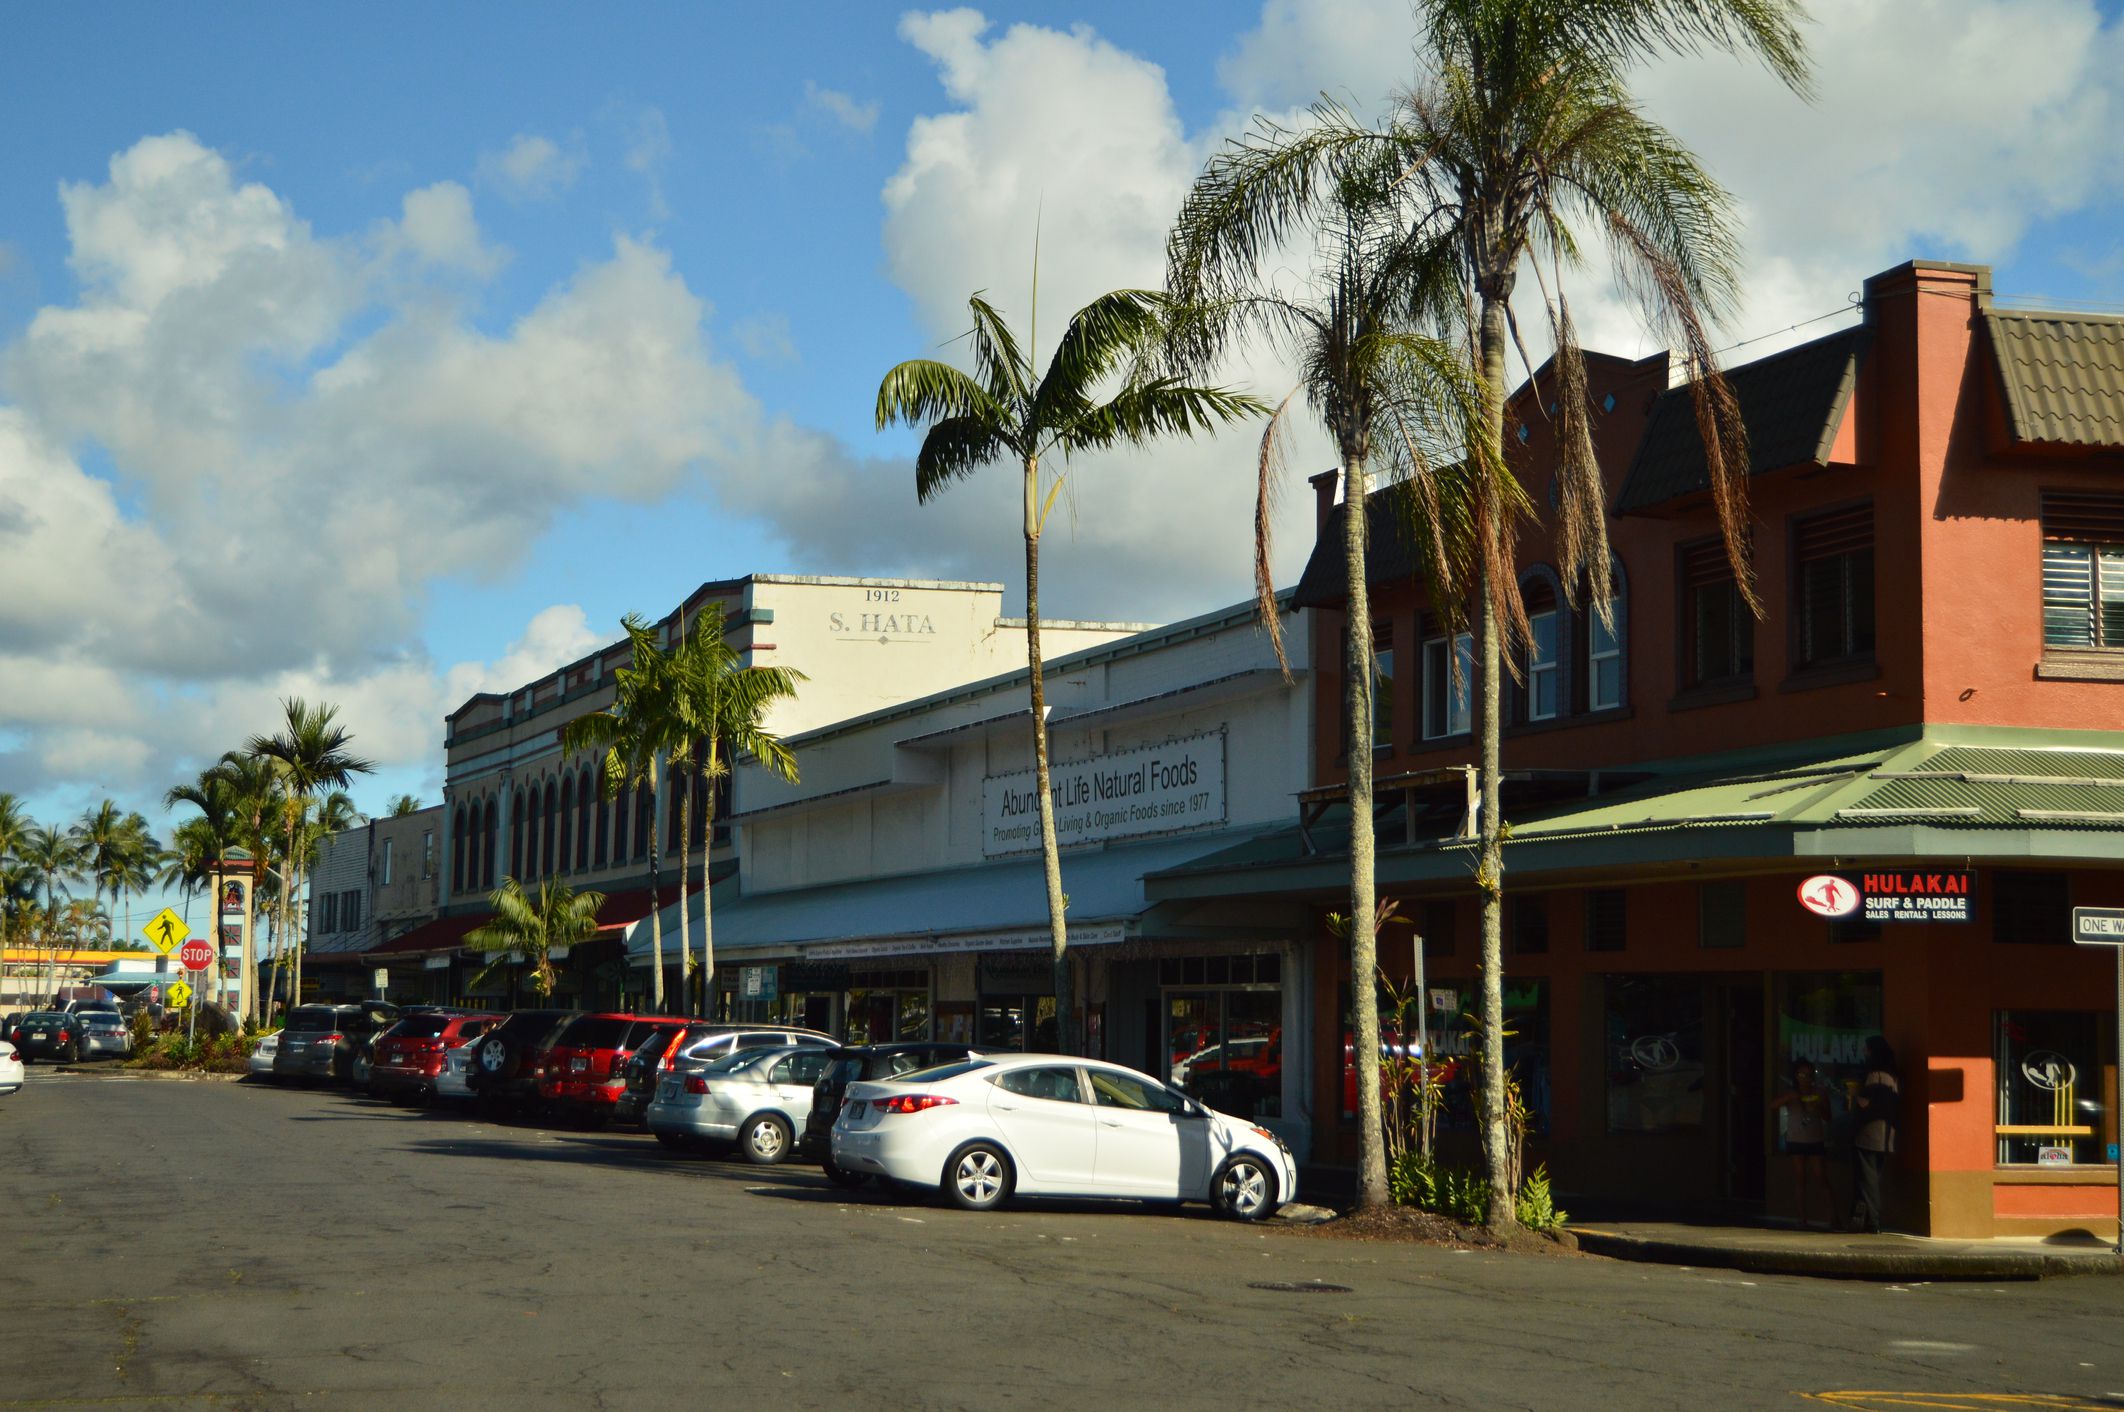 <p>Here’s a look at some of the best affordable places to live across the Hawaiian islands. Peruse the full list to get a better sense of the options available to you.</p><h3 class="u-color-ink u-margin-bottom-sm u-margin-top-ms@tablet-and-desktop u-margin-top-sm@mobile">1. Hilo, Hawaii</h3><p>Located on the eastern side of the big island of Hawaii, the city of Hilo sits on the water. It is surrounded by forest reserves and has quick access to hiking and beaches, such as the secluded Carlsmith Beach Park. The city is also home to the Hilo International Airport, and is one of the largest census-designated places in the state.</p><ul><li>Population: 44,186</li><li>Median Household Income: $70,356</li><li>Cost of Living: 127% of U.S. average</li><li>Median Rent Price: $1,650</li><li>Home Price-to-Income Ratio: 7</li><li>Average Property Tax: 0.39%</li></ul><p class="padding-top-ms u-margin-bottom-ms"><b>Housing Affordability: </b>The median rent price in Hilo is $1,650, and prices have fallen year-over-year. For those looking to buy, the median value of an owner occupied home is about $489,000.</p>